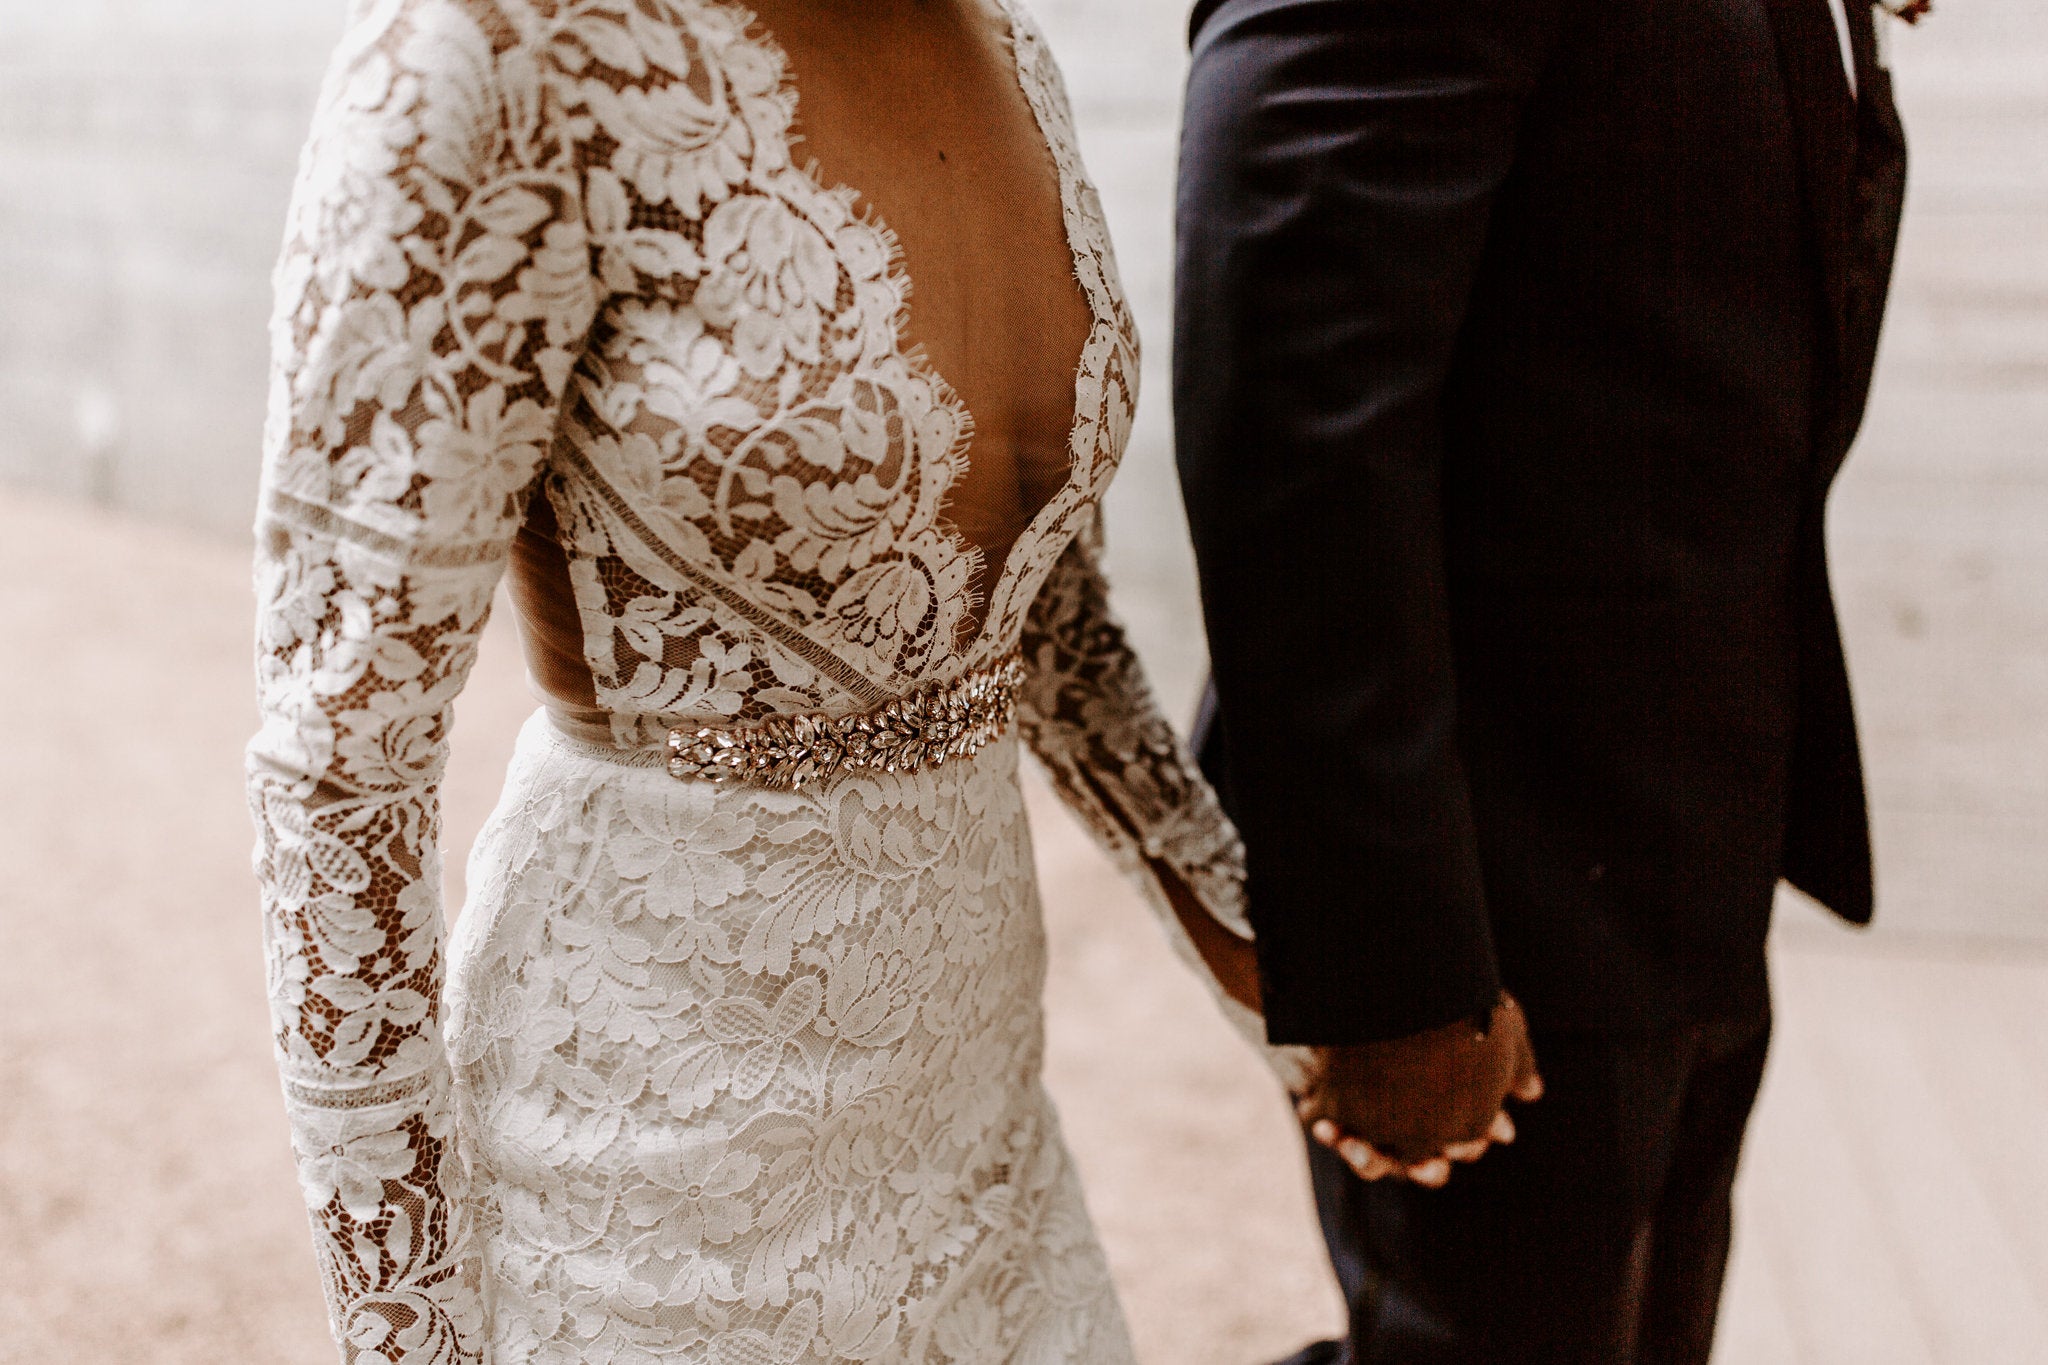 Bridal Bliss: One Look At Rawle And Crystal's Stunning Dallas Wedding And You'll Love It As Much As We Do
